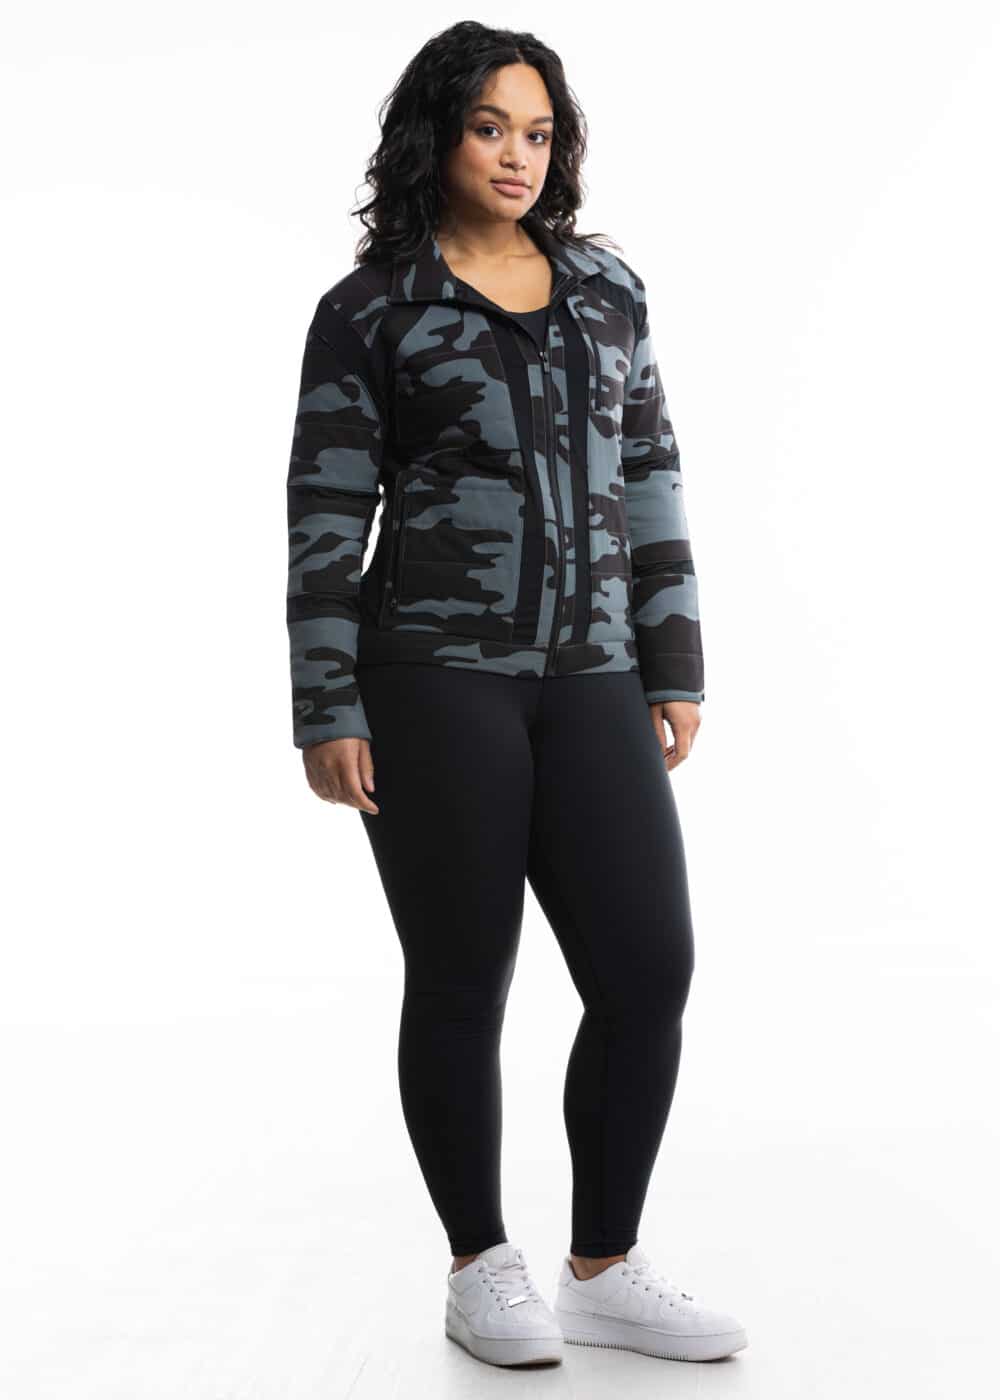 Woman modeling Breezy Moto Jacket from the Alexo Athletica x Springfield Armory collection